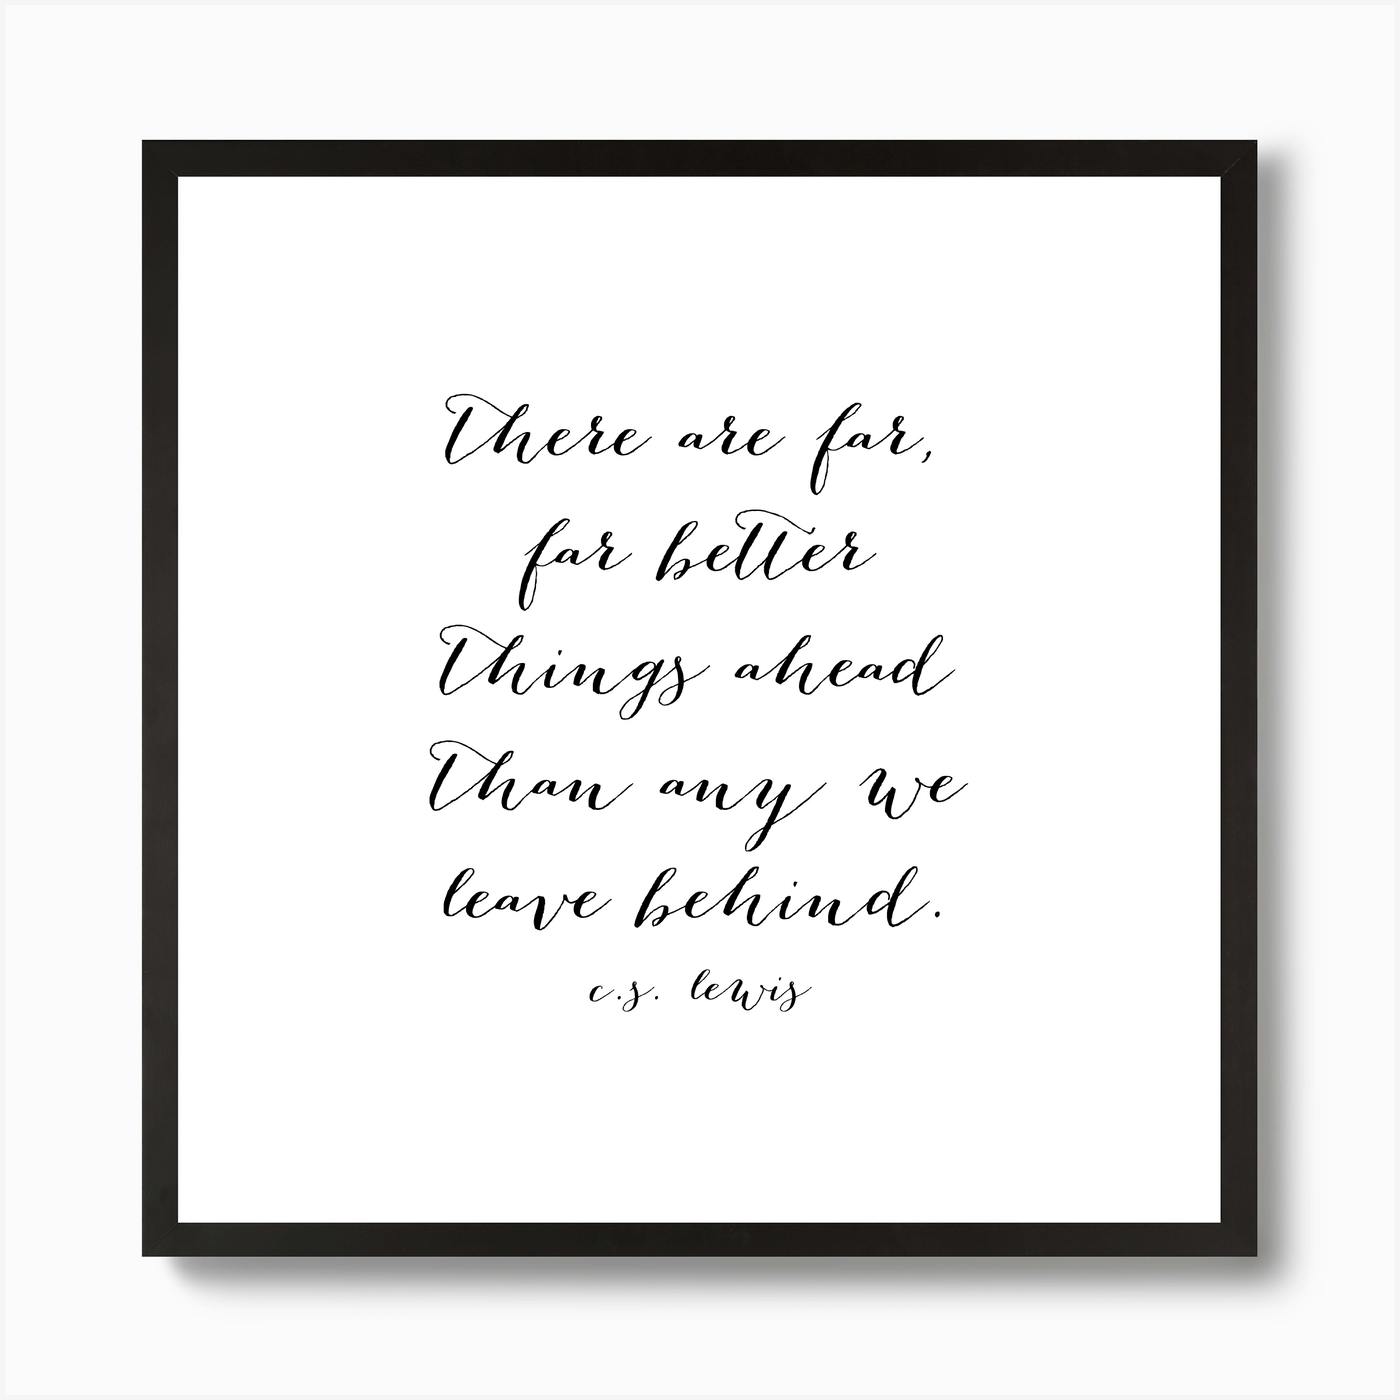 Digital Download Print Motivational Art Printable Art There are far far better things ahead than any we leave behind,Inspirational Quote